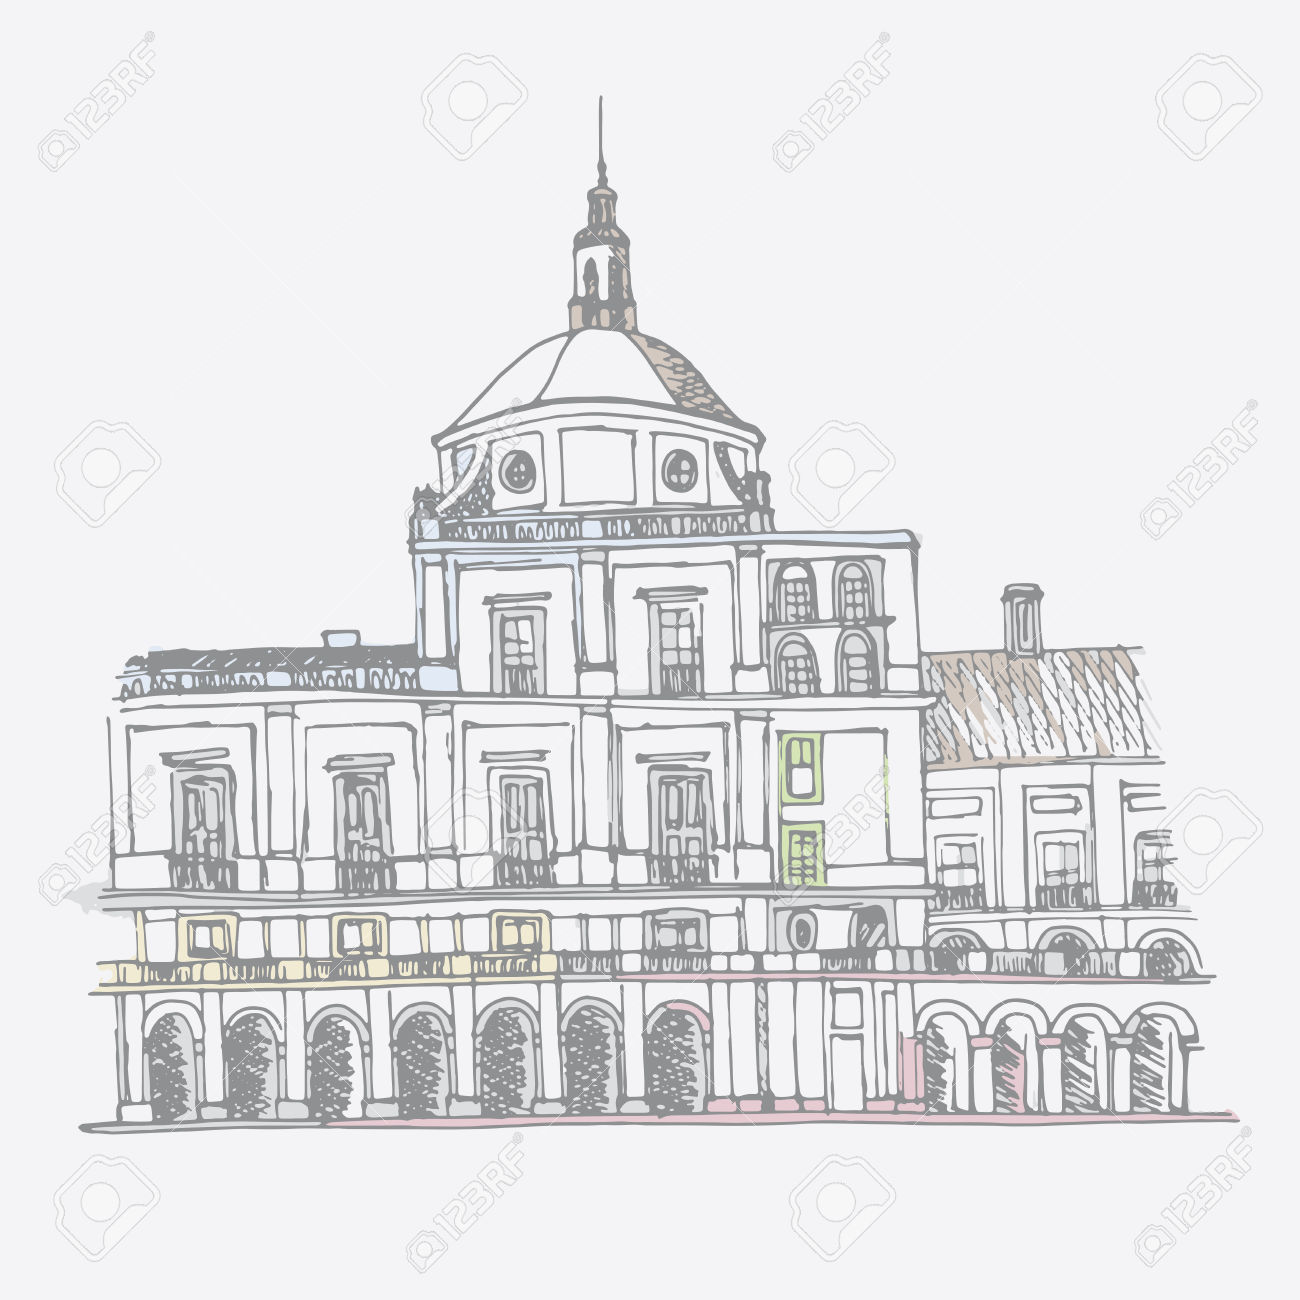 Urban Sketch Of The Royal Palace In Aranjuez Royalty Free Cliparts.